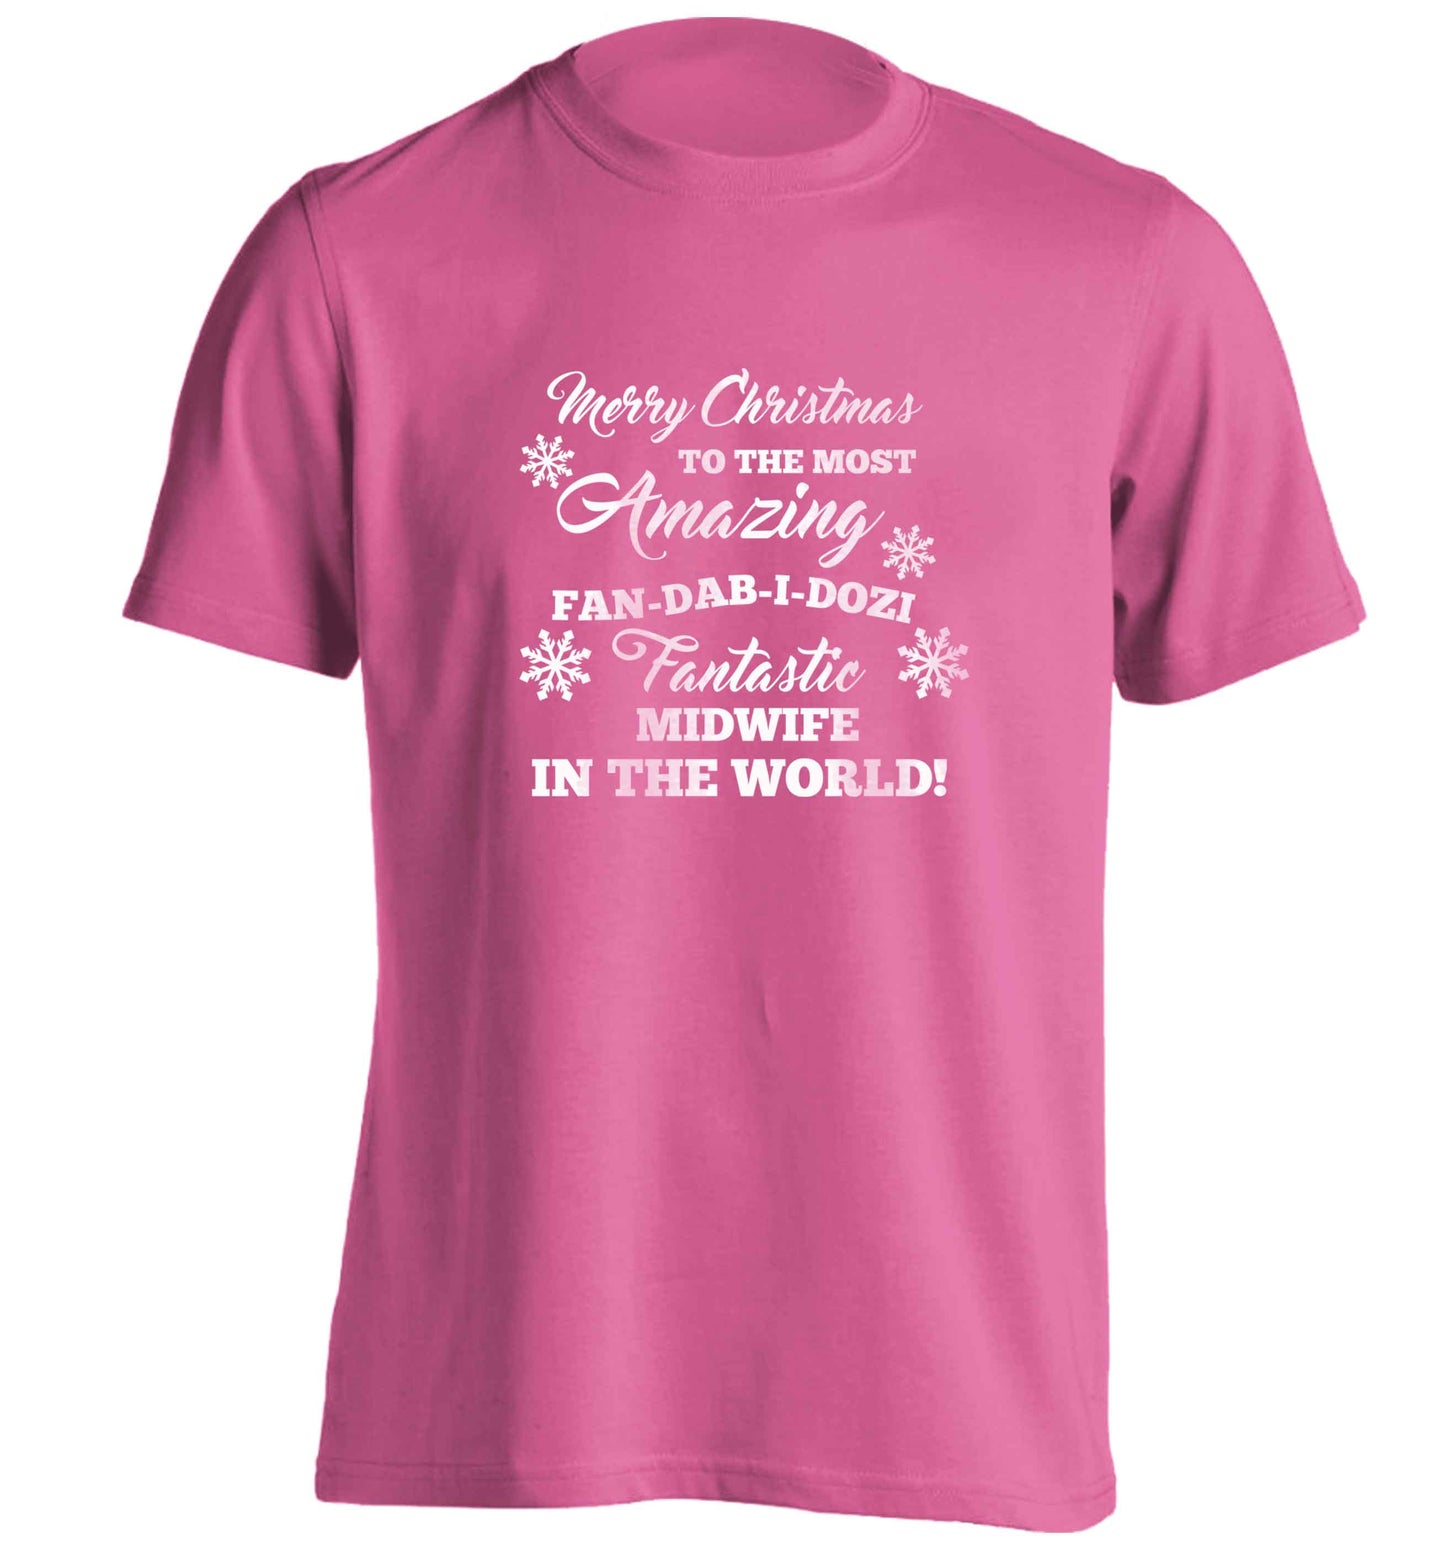 Merry Christmas to the most amazing midwife in the world! adults unisex pink Tshirt 2XL